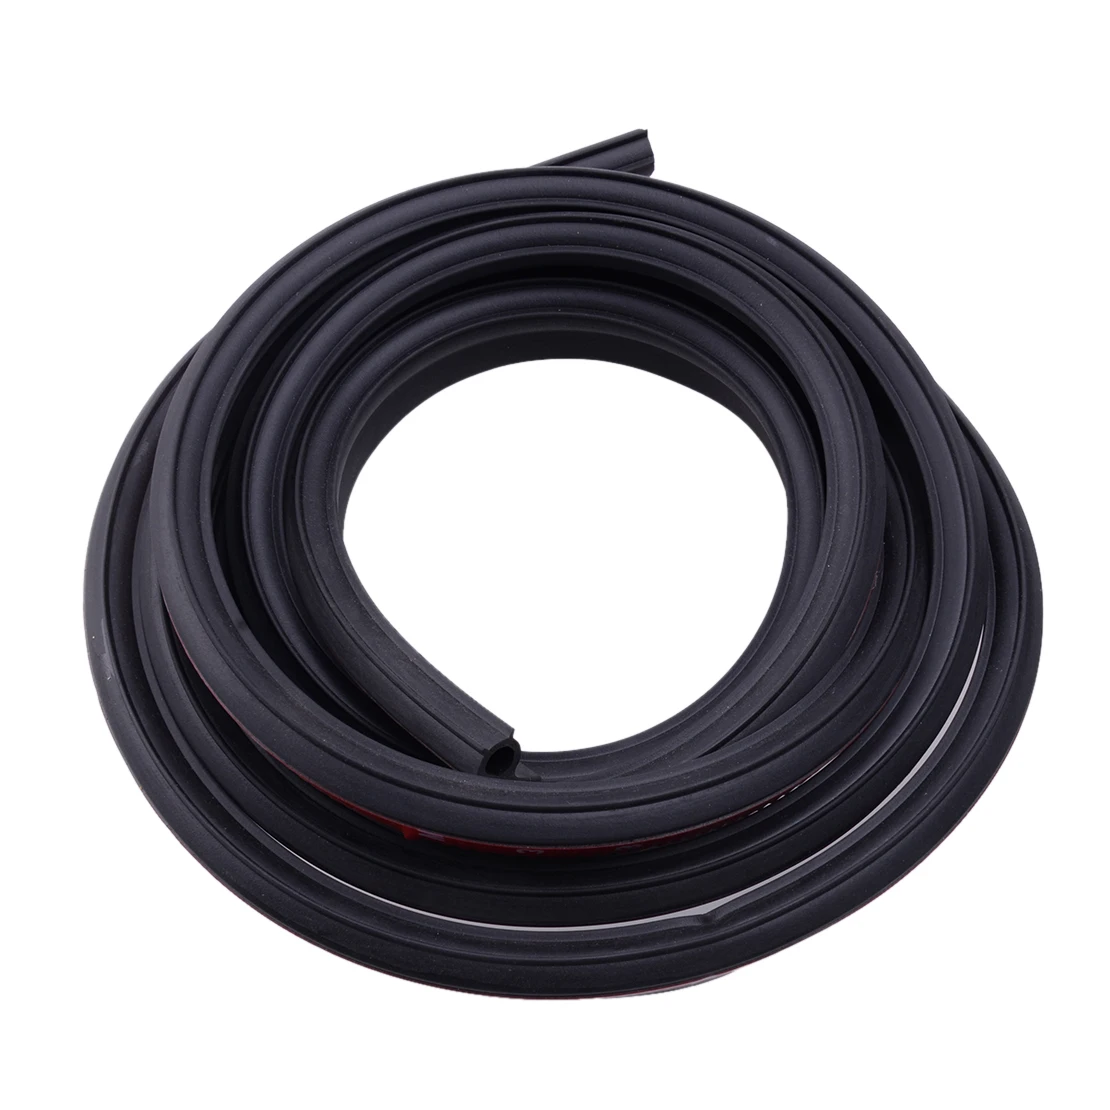 

3m Black Tail Gate Tailgate Dust Protection Seal Kit Rubber For Truck Pick-up Bus Boat